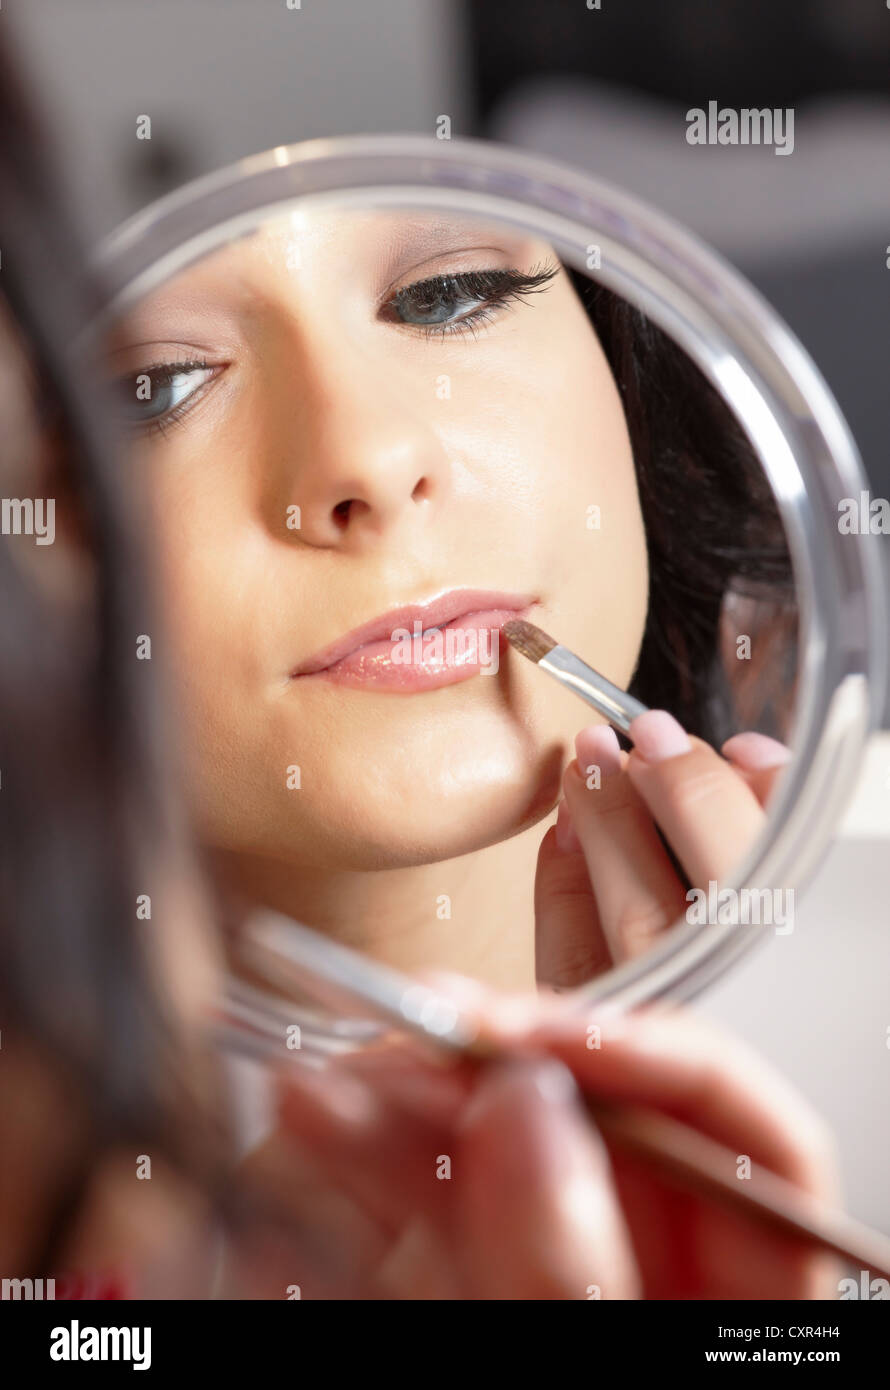 Young woman holding a hand mirror and a lipstick brush Stock Photo